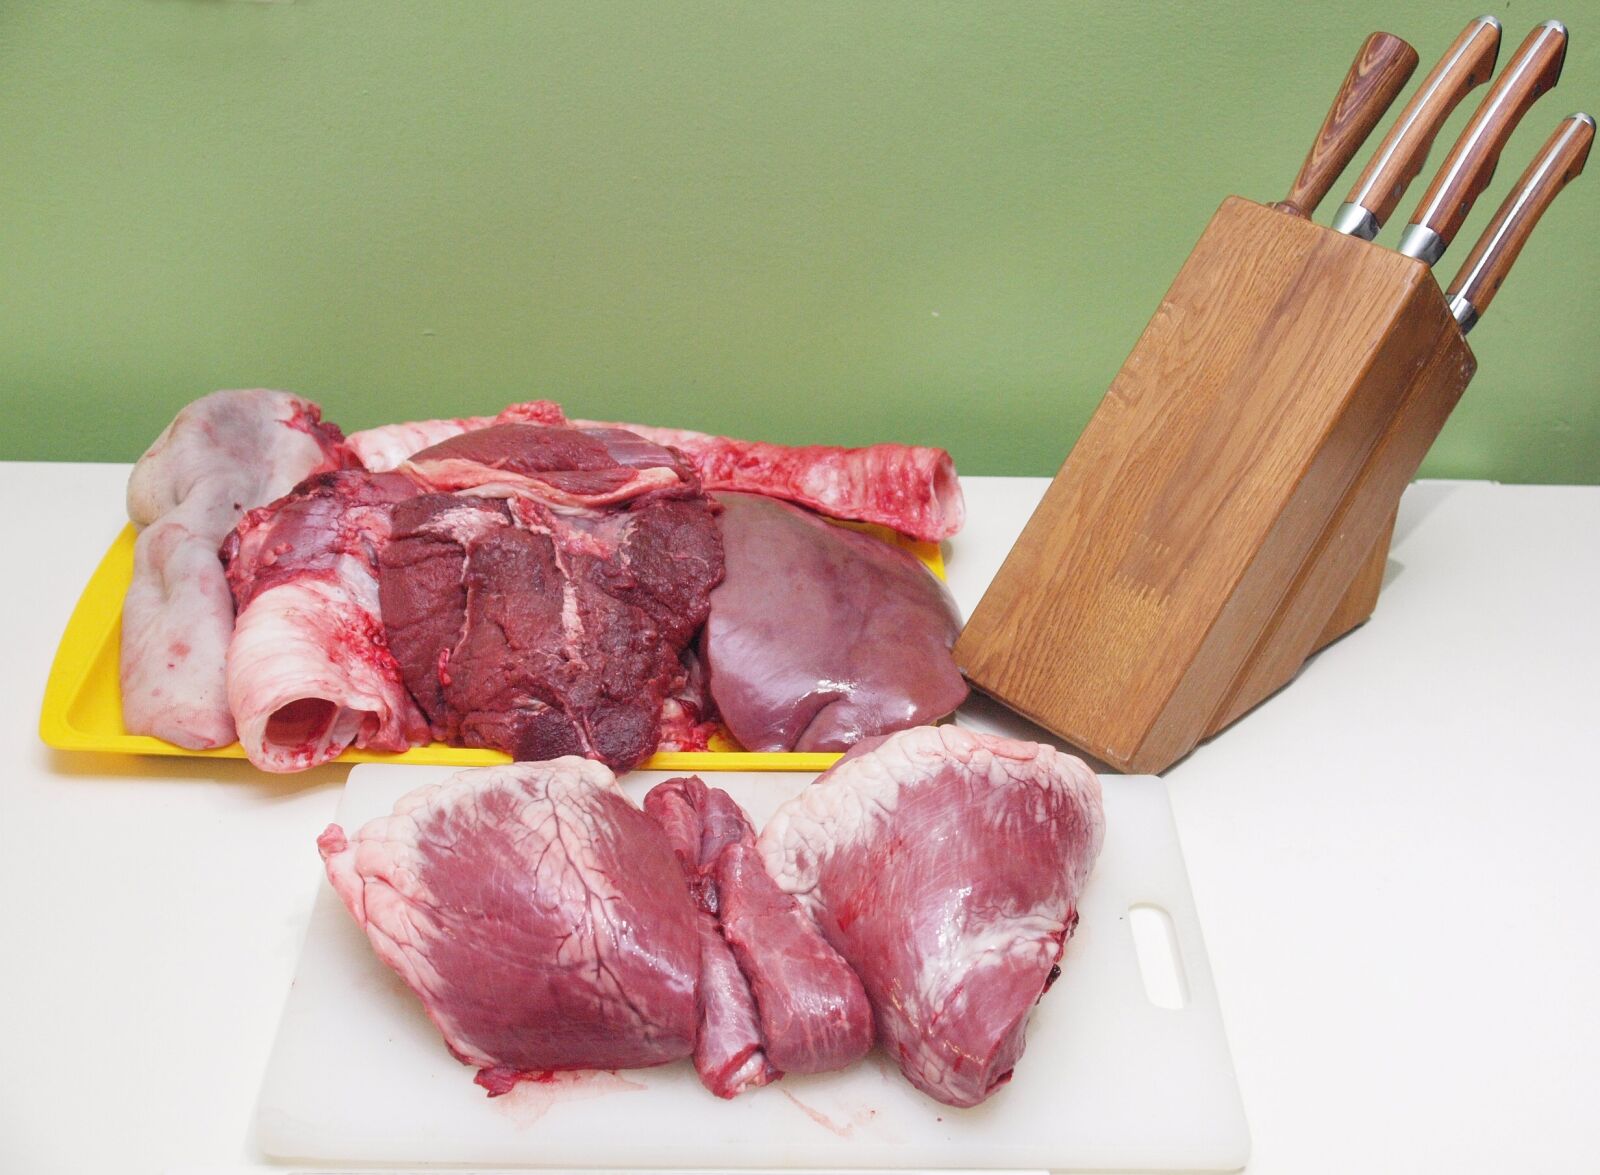 Olympus E-30 sample photo. Meat, knives, knife photography